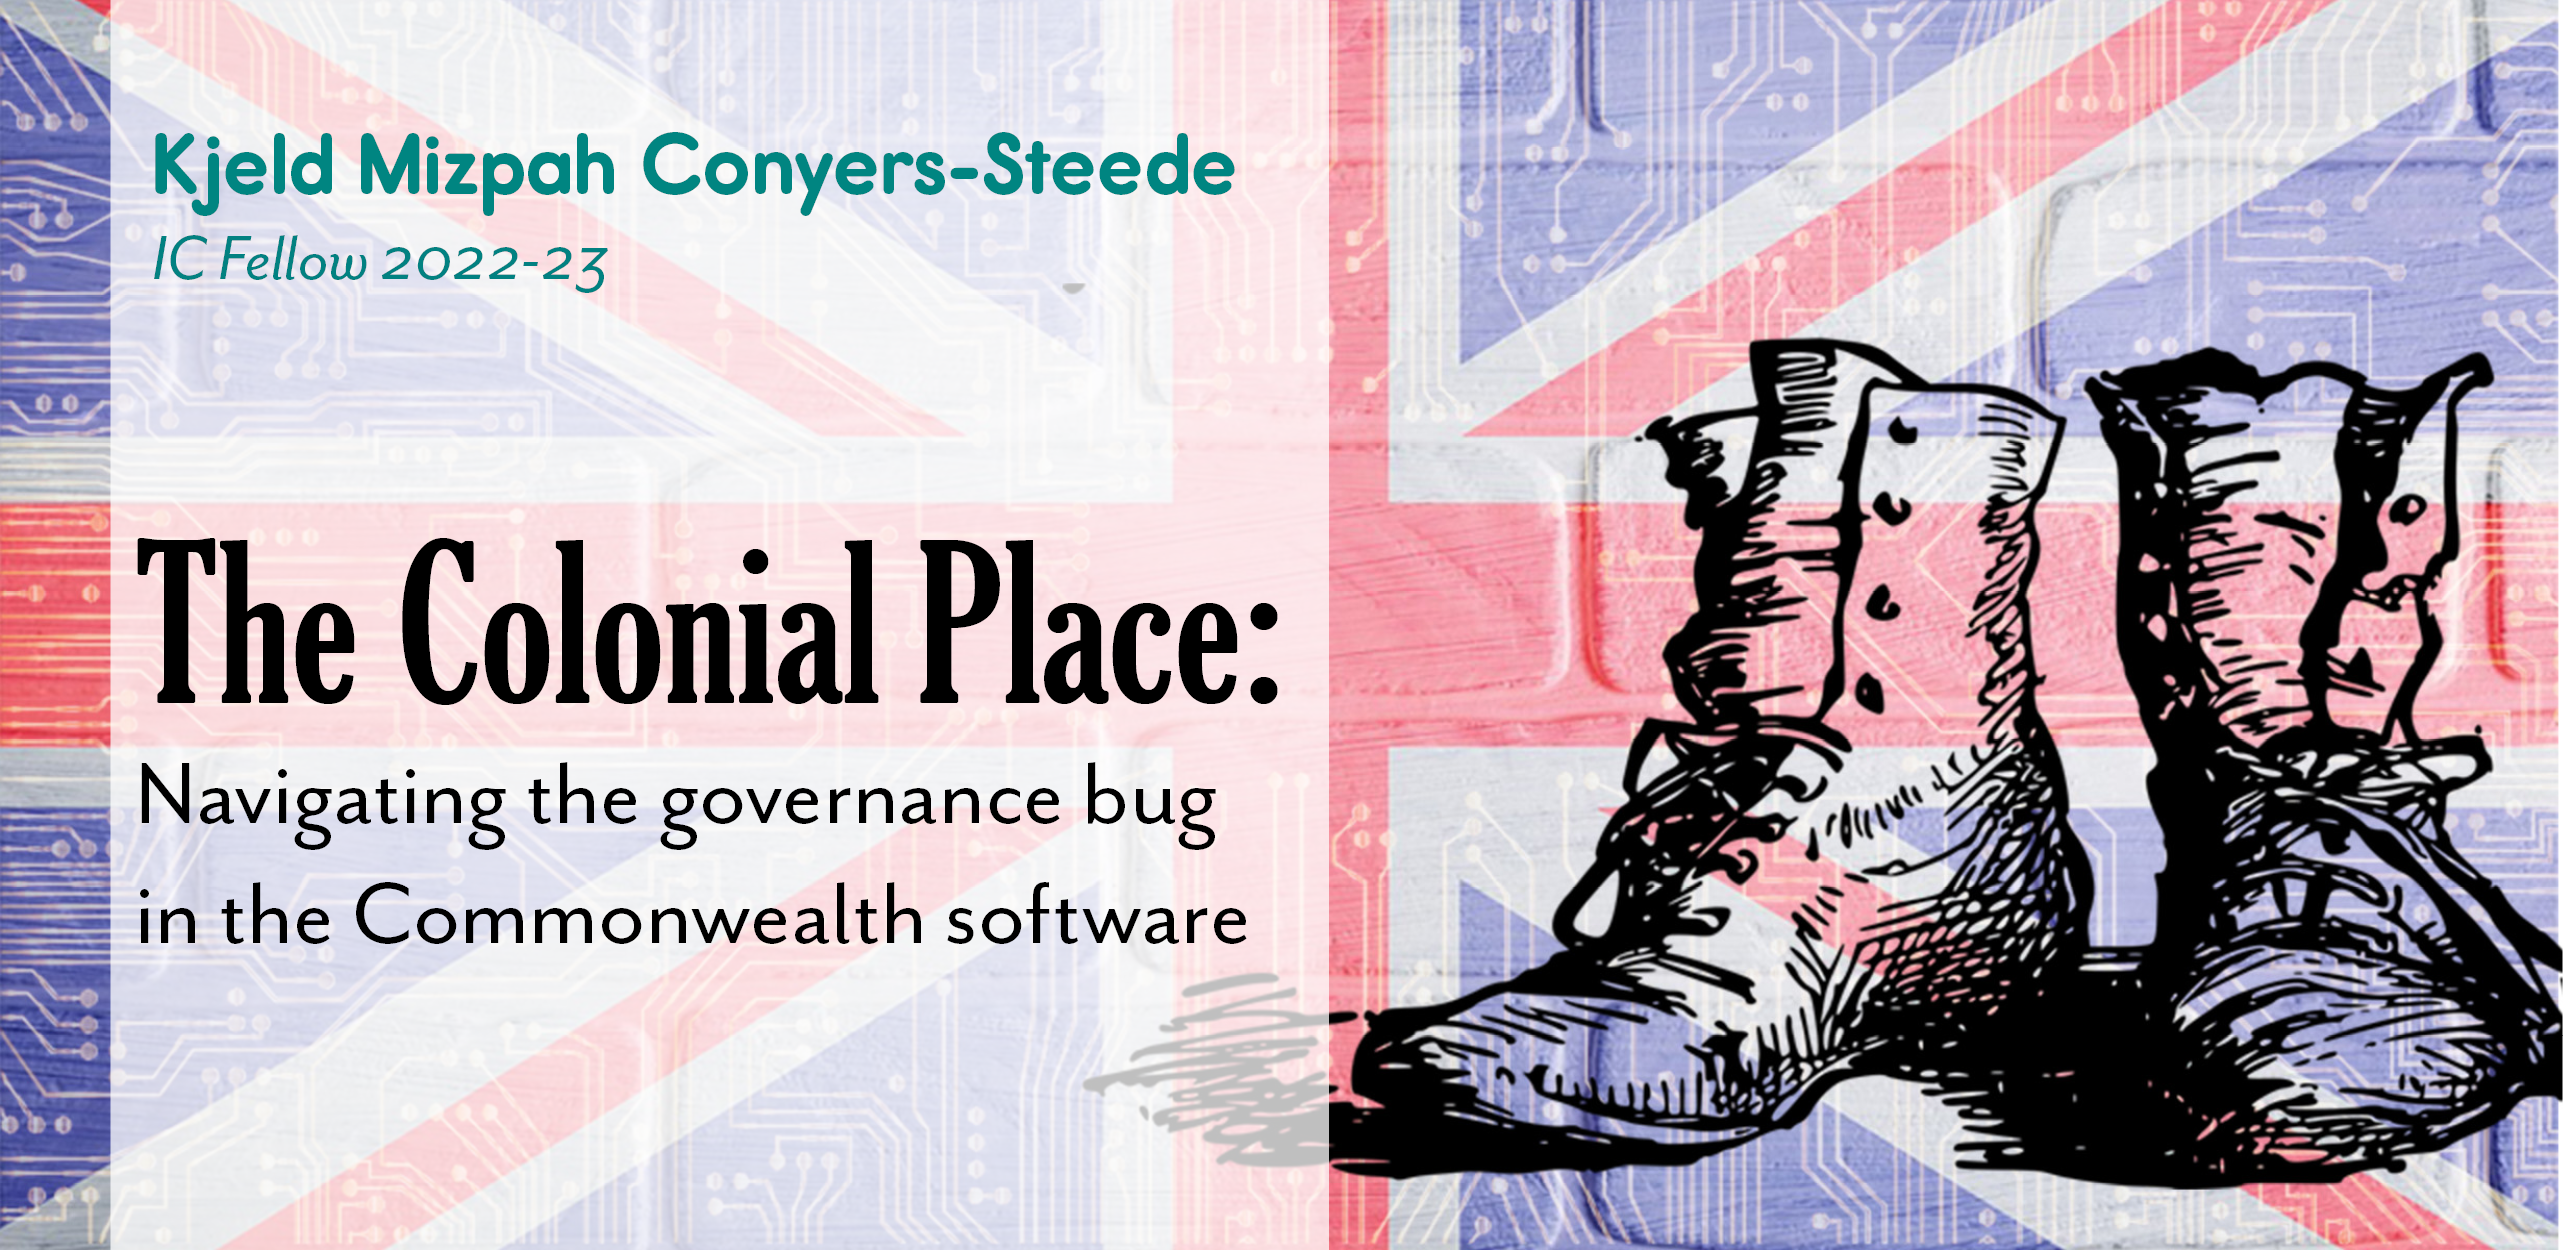 The Colonial Place, a blog post by KJ Conyer-Steede. A background of Union Jack is faded and overlaid with circuitry. in the foreground, black boots are visible.